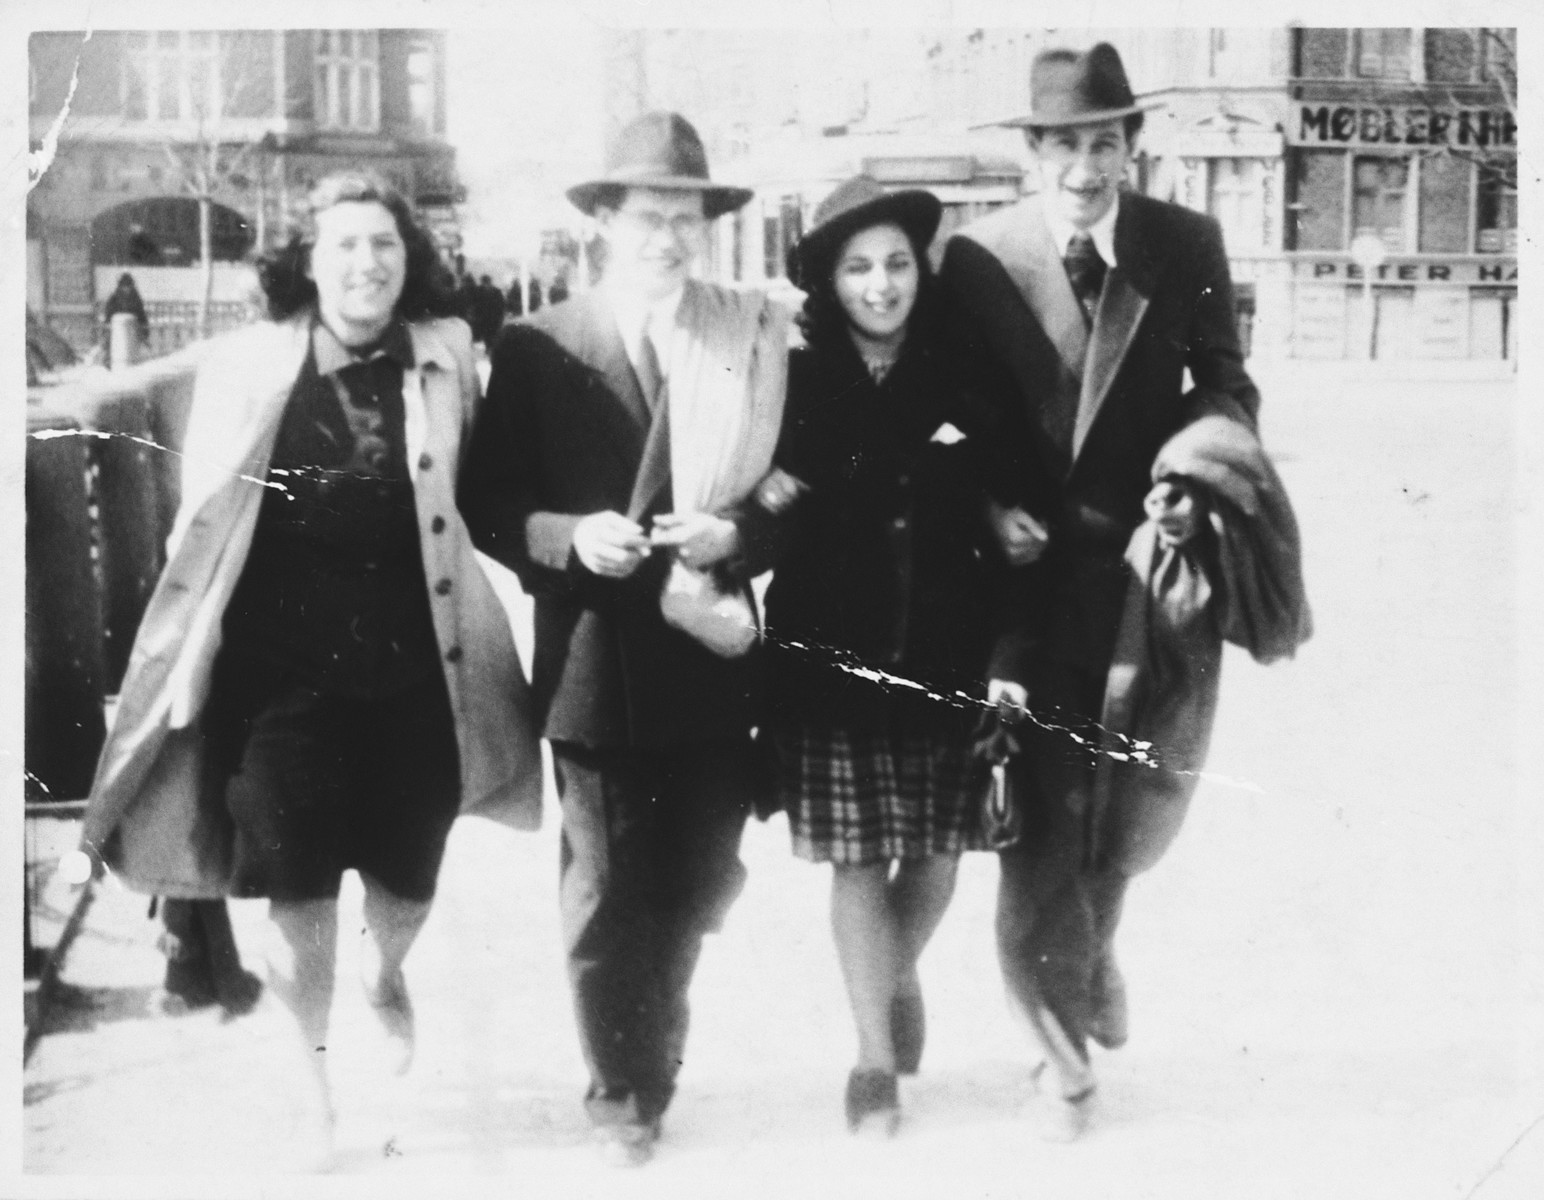 Four young Jewish men and women walk along the Fredriksgade in downtown Copenhagen during the German occupation.

Pictured from left to right are: Esther Diament, David Nussbaum, Leila Altschuler, and Jac. Kransnik.